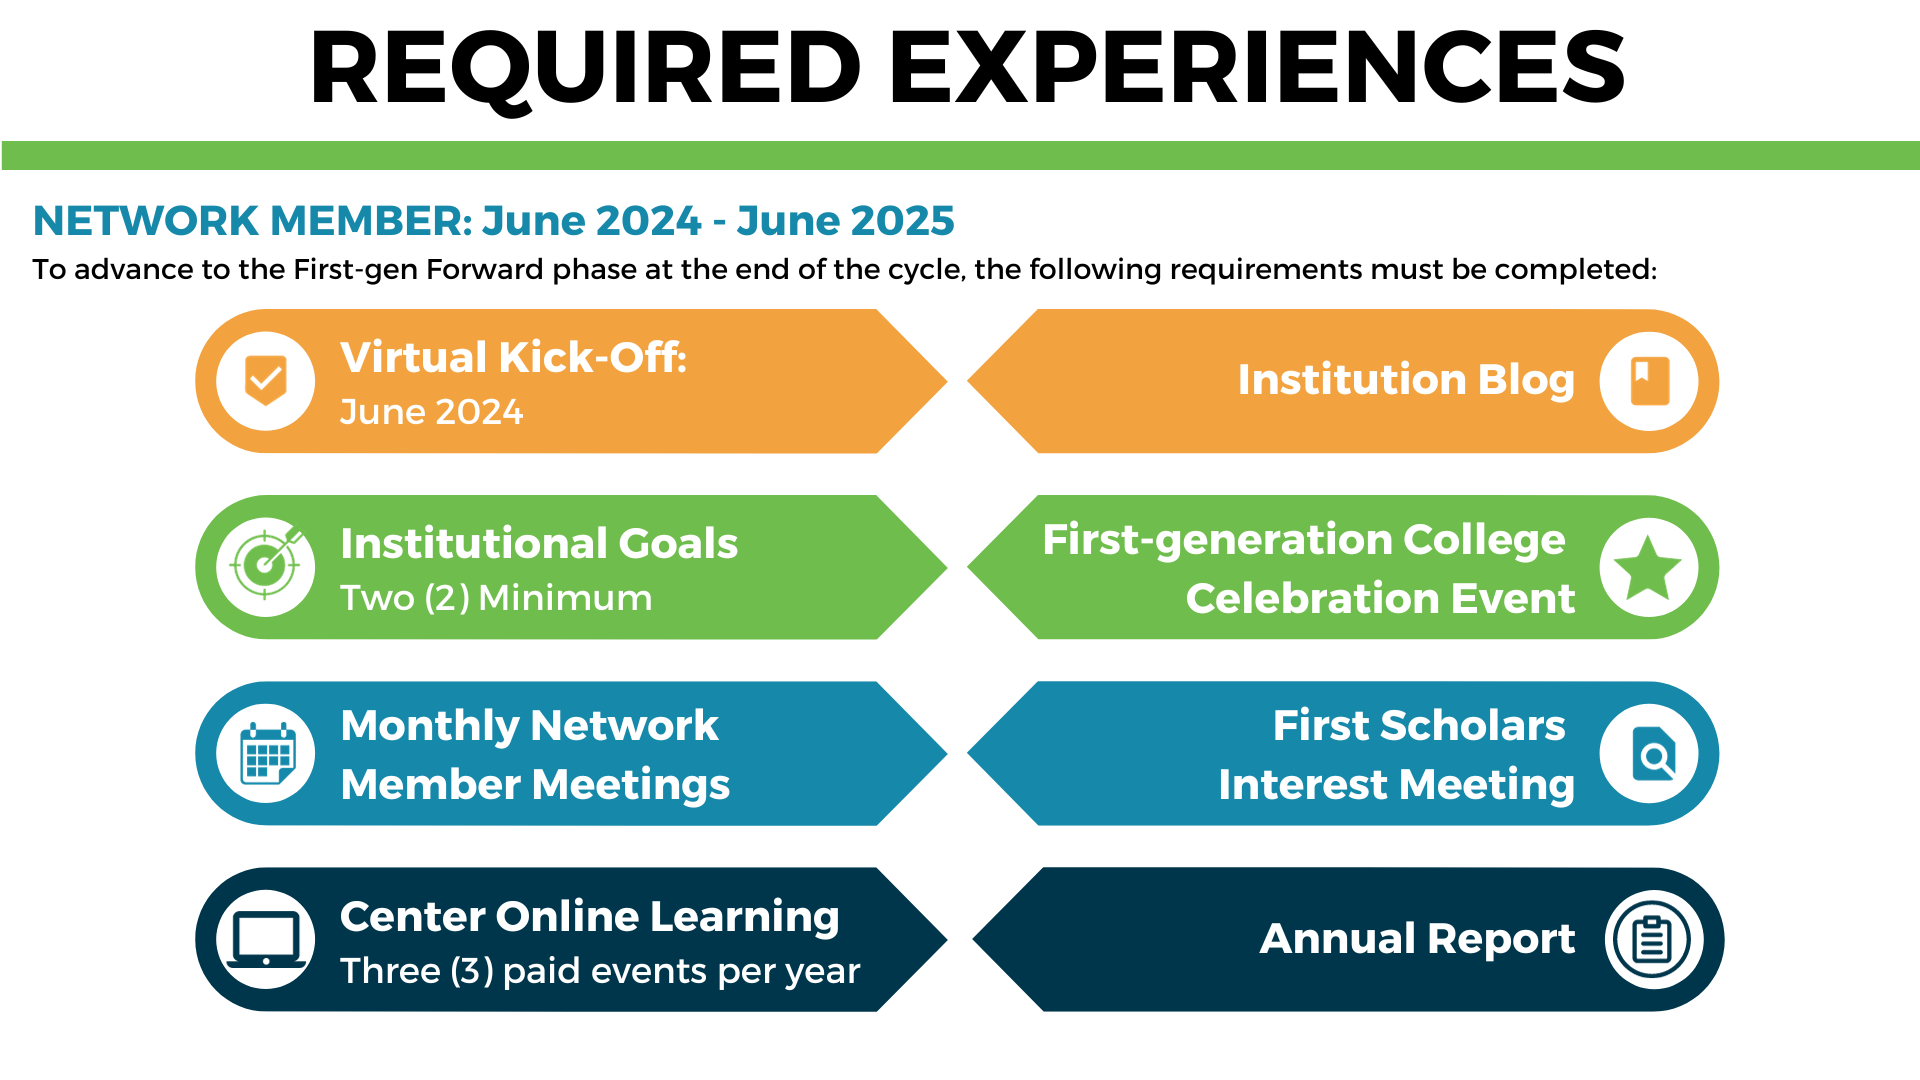 REQUIREMENTS= Virtual Kick-Off + Institution Blog + First-gen College Celebration Event + 2 Institution Goals + First Scholars Interest Meeting + Monthly Network Member Meetings + Center Online Learning Three (3) paid events per year + Annual Report